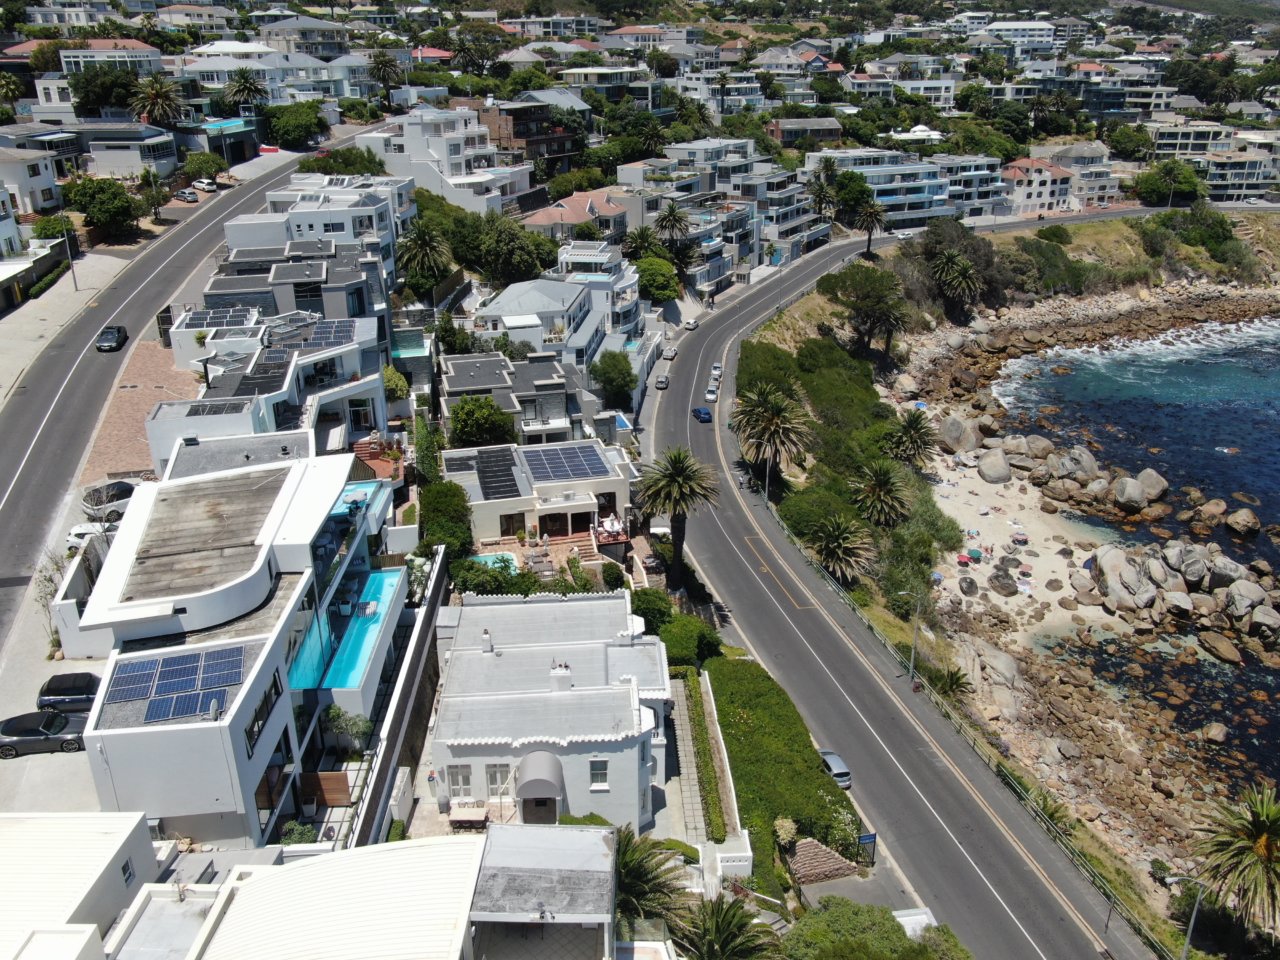 Photo 25 of Camps Bay Beach Villa accommodation in Camps Bay, Cape Town with 4 bedrooms and 4 bathrooms